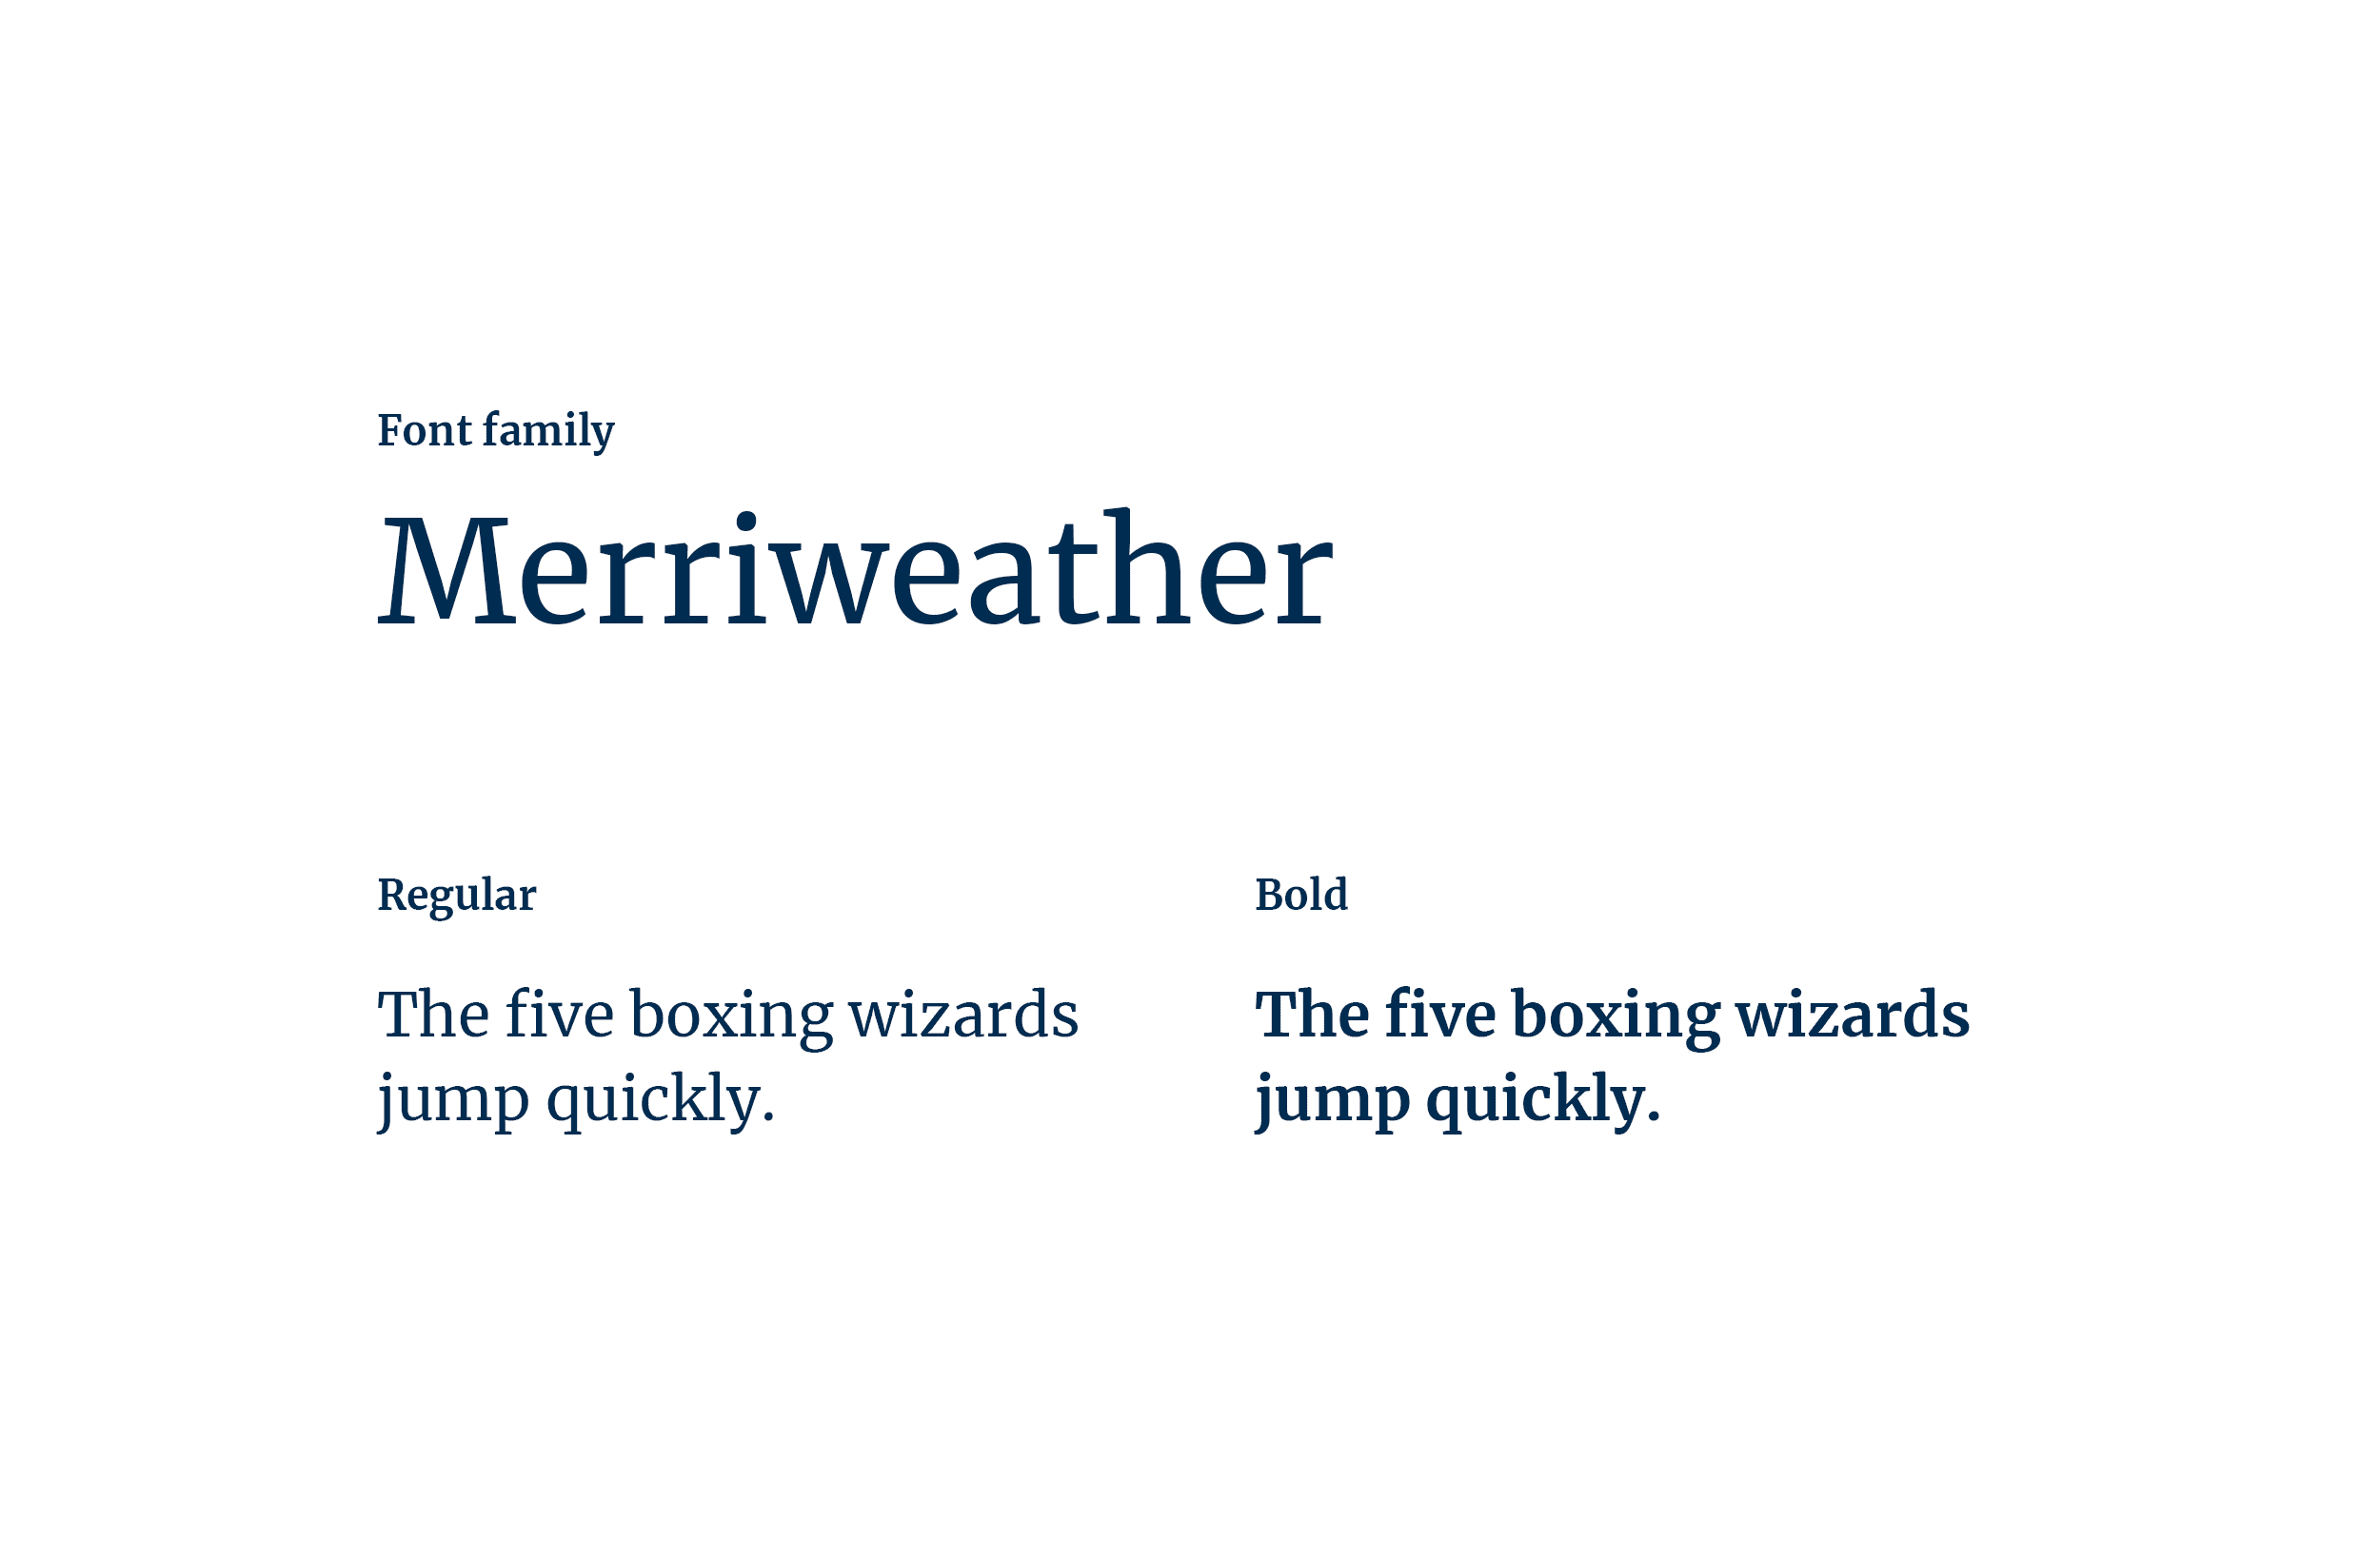 Display of the Merriweather font which was used to create the logo